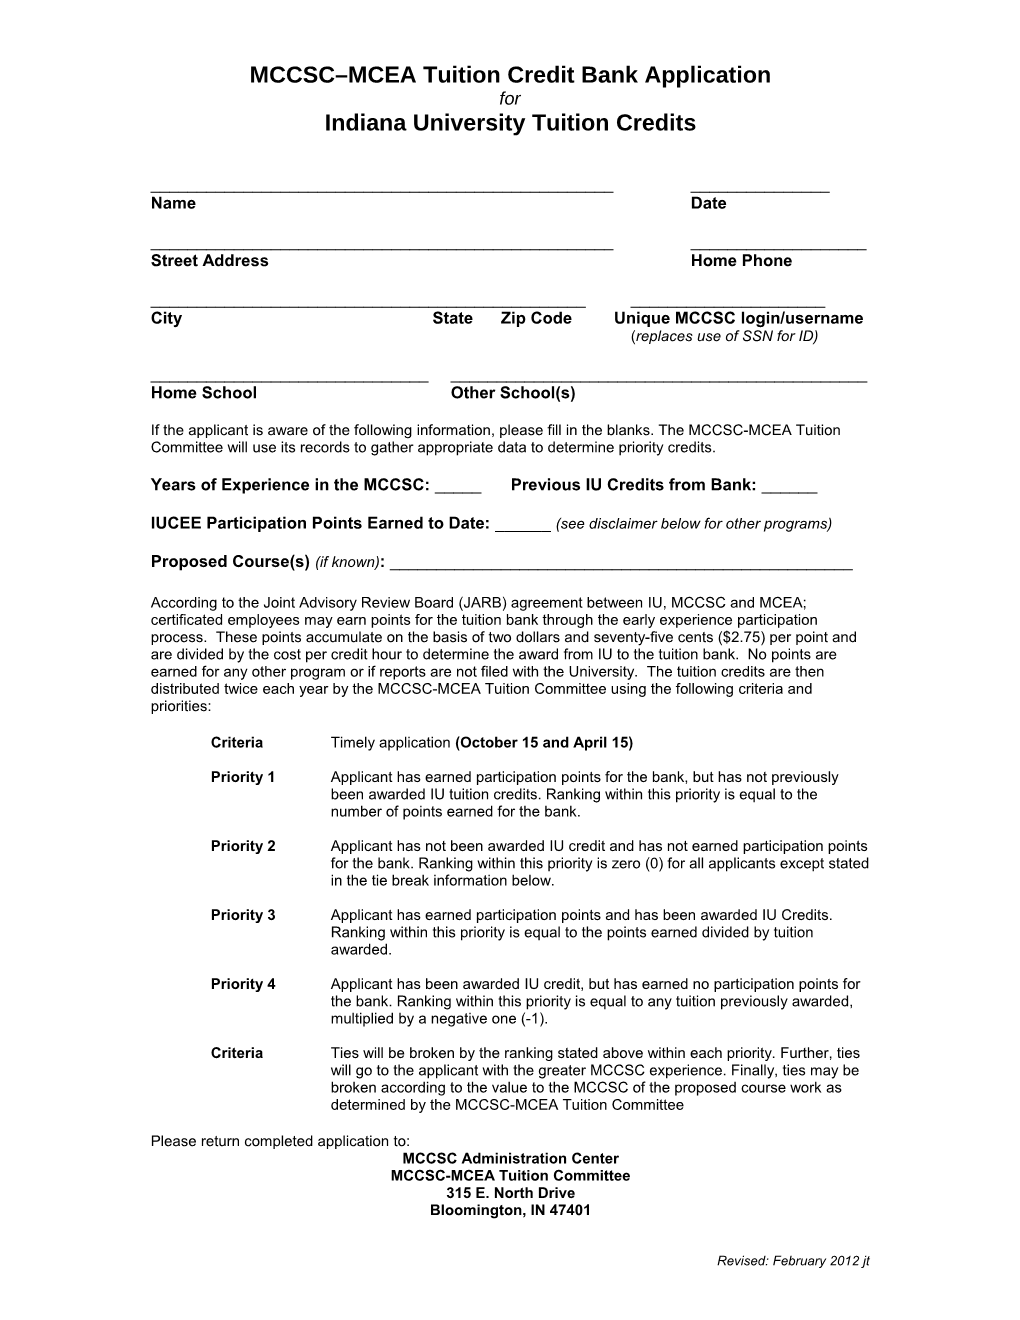 MCCSC MCEA Tuition Credit Bank Application